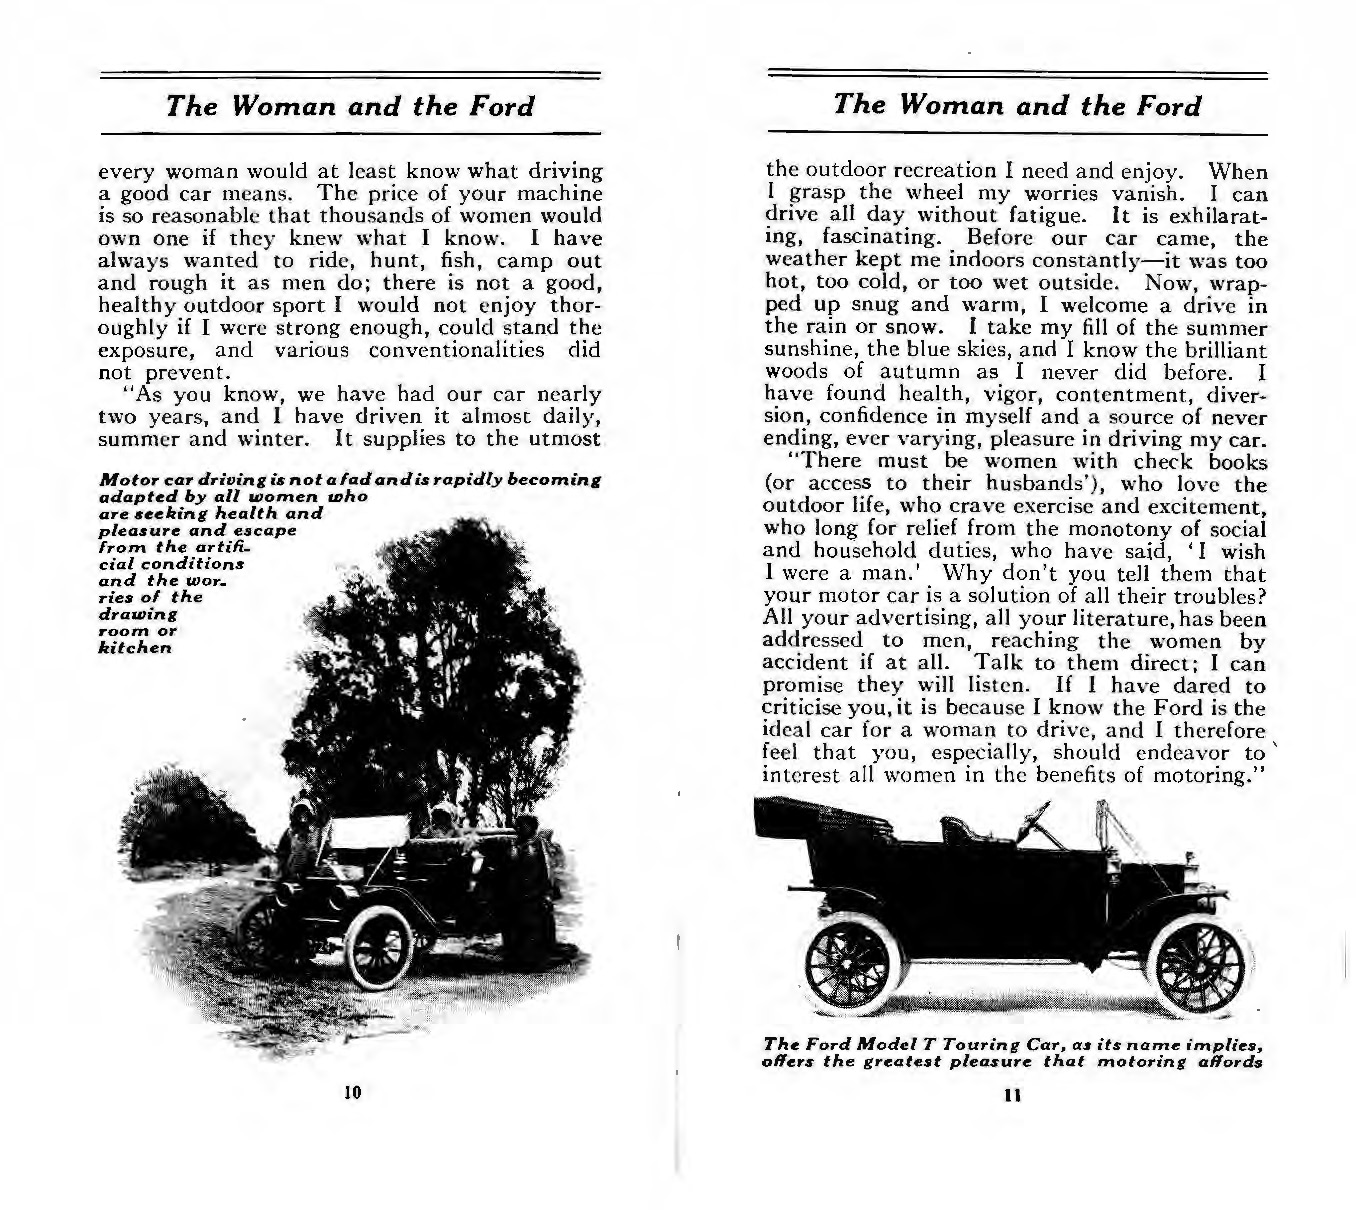 n_1912 The Woman & the Ford-10-11.jpg